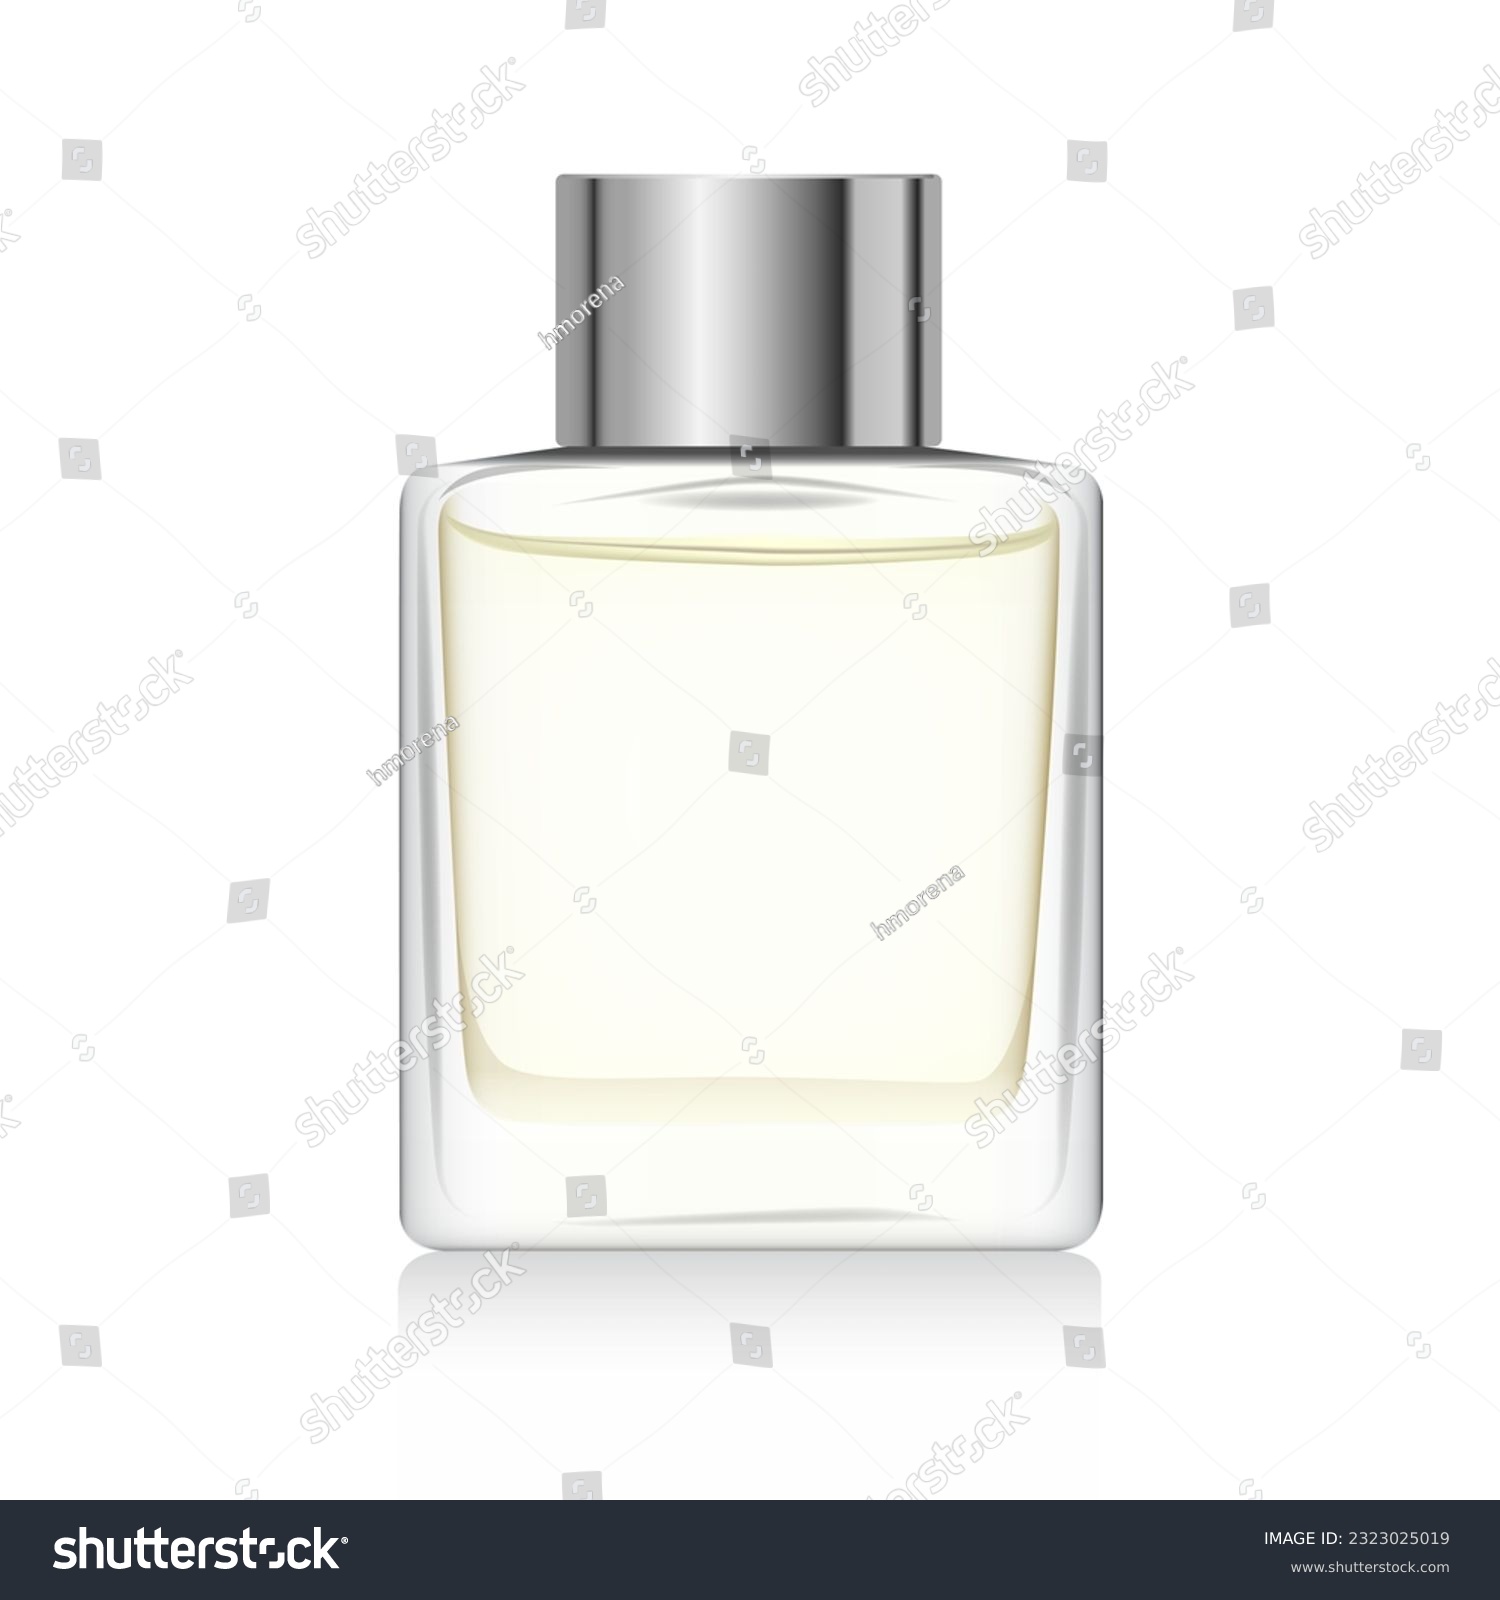 SVG of Transparent reed diffuser bottle mockup. Home fragrance with yellow liquid perfume and without sticks. Cube aromatic diffuser with silver cap. 3D vector illustration svg